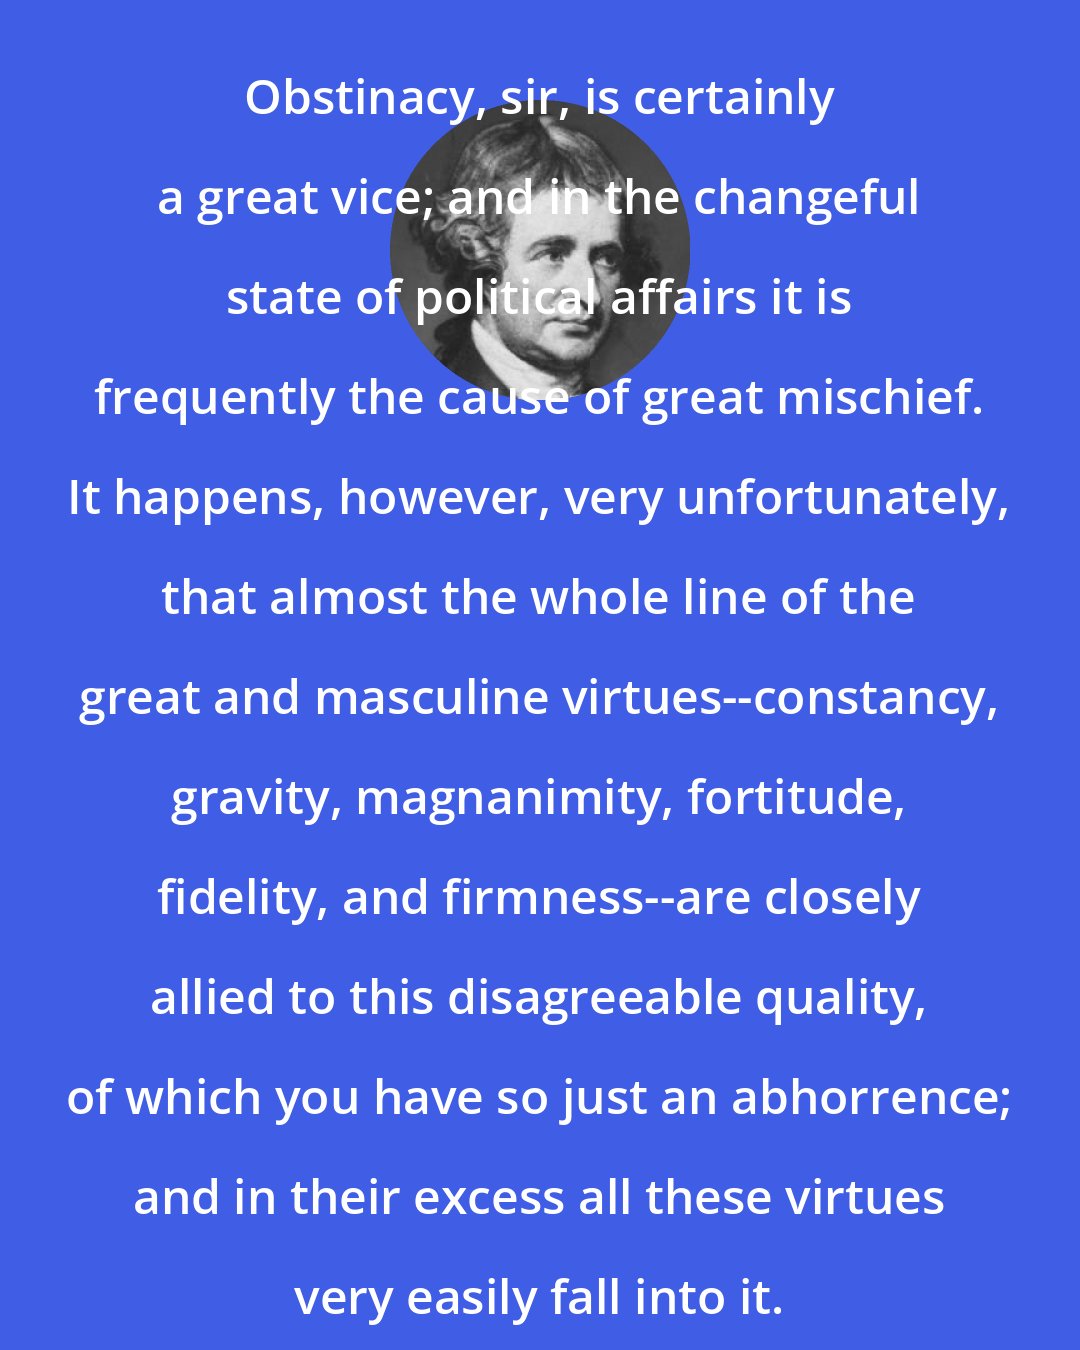 Edmund Burke: Obstinacy, sir, is certainly a great vice; and in the changeful state of political affairs it is frequently the cause of great mischief. It happens, however, very unfortunately, that almost the whole line of the great and masculine virtues--constancy, gravity, magnanimity, fortitude, fidelity, and firmness--are closely allied to this disagreeable quality, of which you have so just an abhorrence; and in their excess all these virtues very easily fall into it.